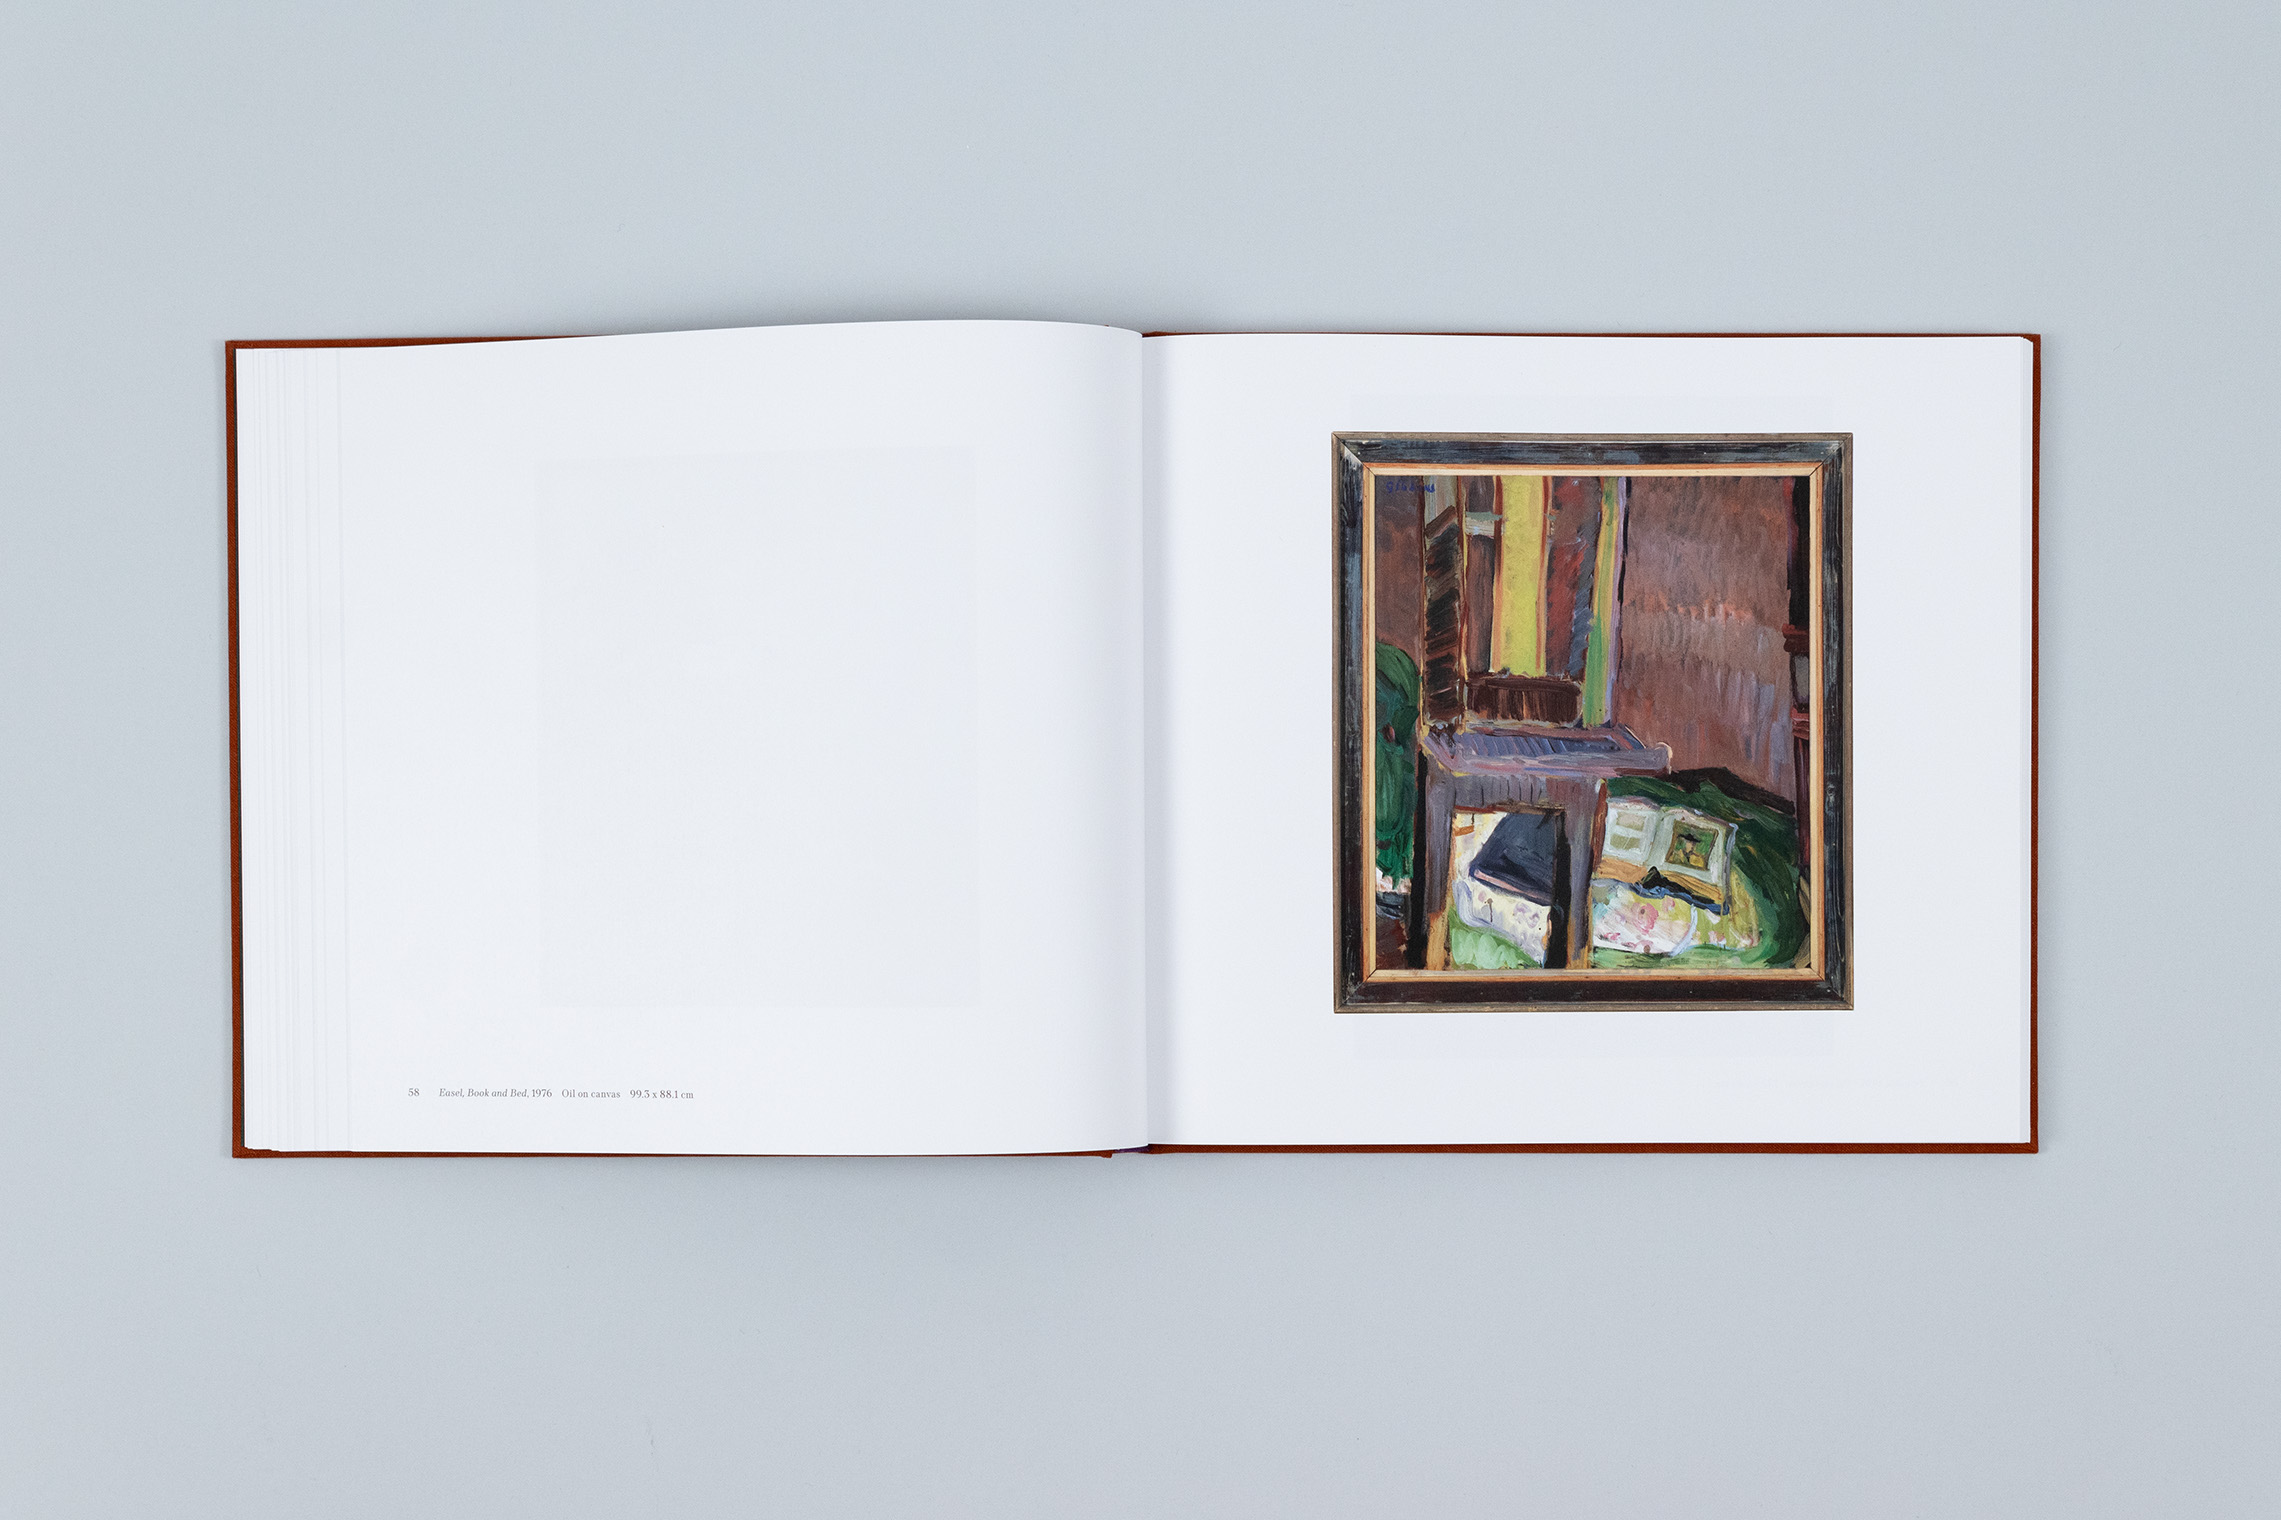 Carole Gibbons monograph spread showing an oil painting with a chair in the foreground